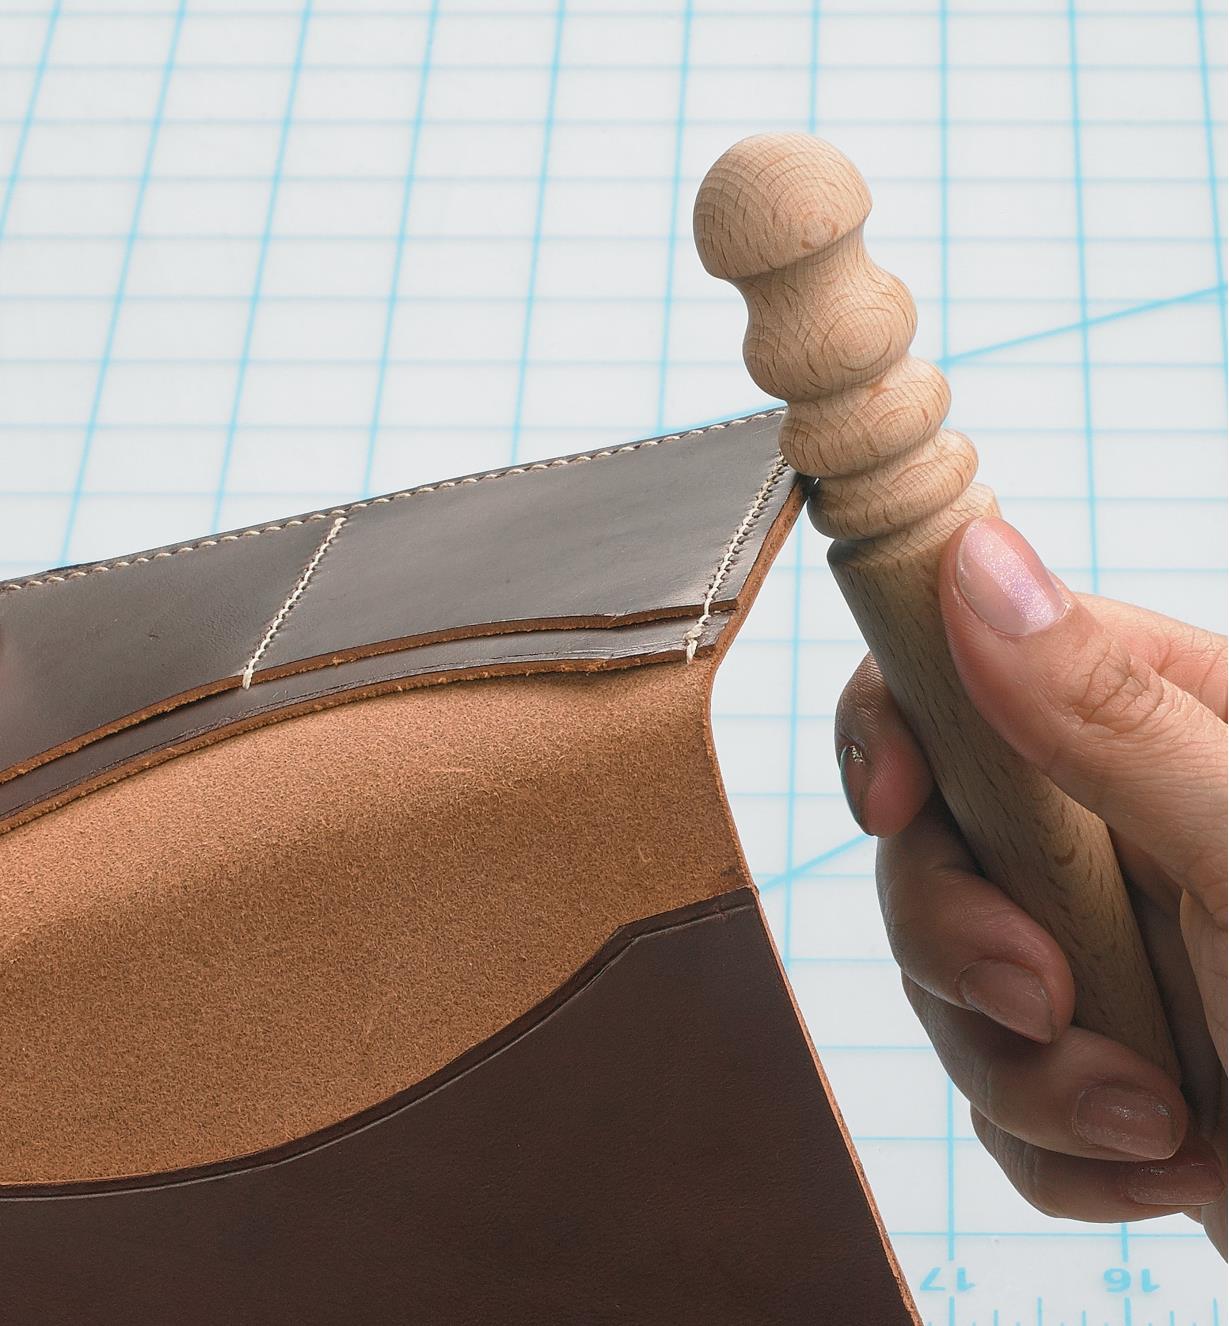 Sealing the edge of a leather folder with the Leather Slicker